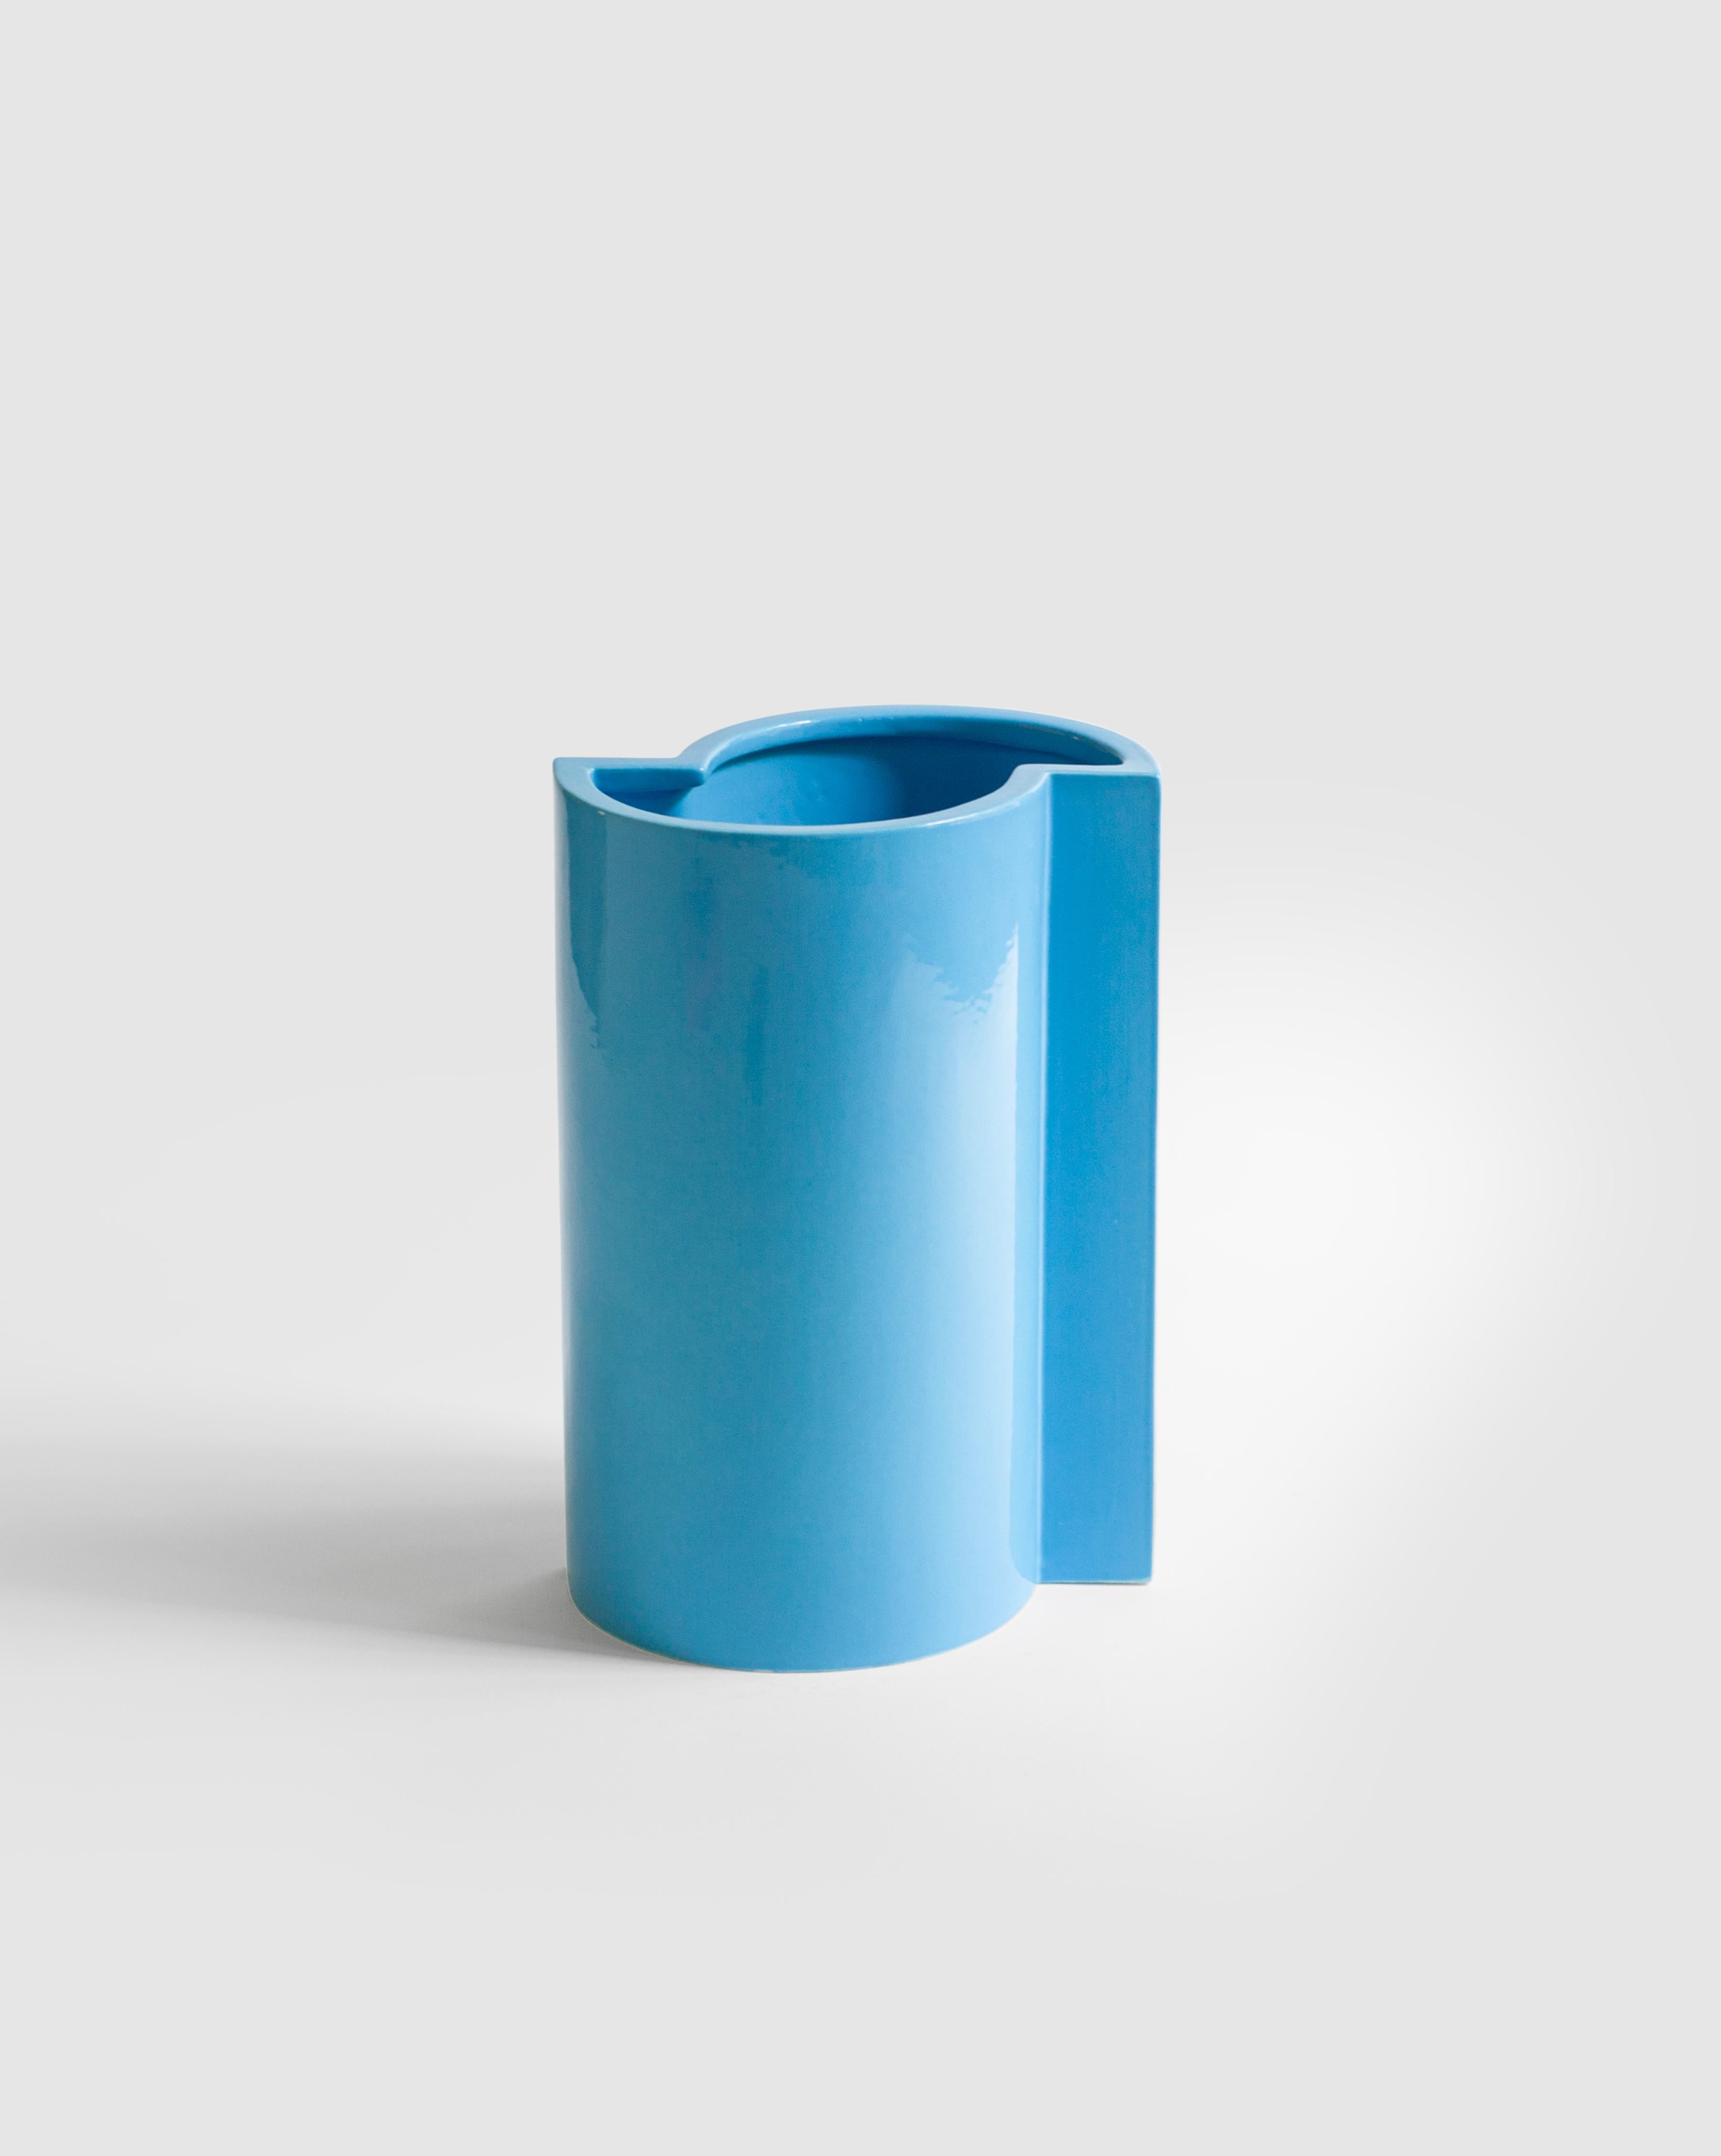 A minimalist and playful vase in slip-cast ceramic with a blue turquoise glaze, the piece is handmade in Milan.
Part of the 